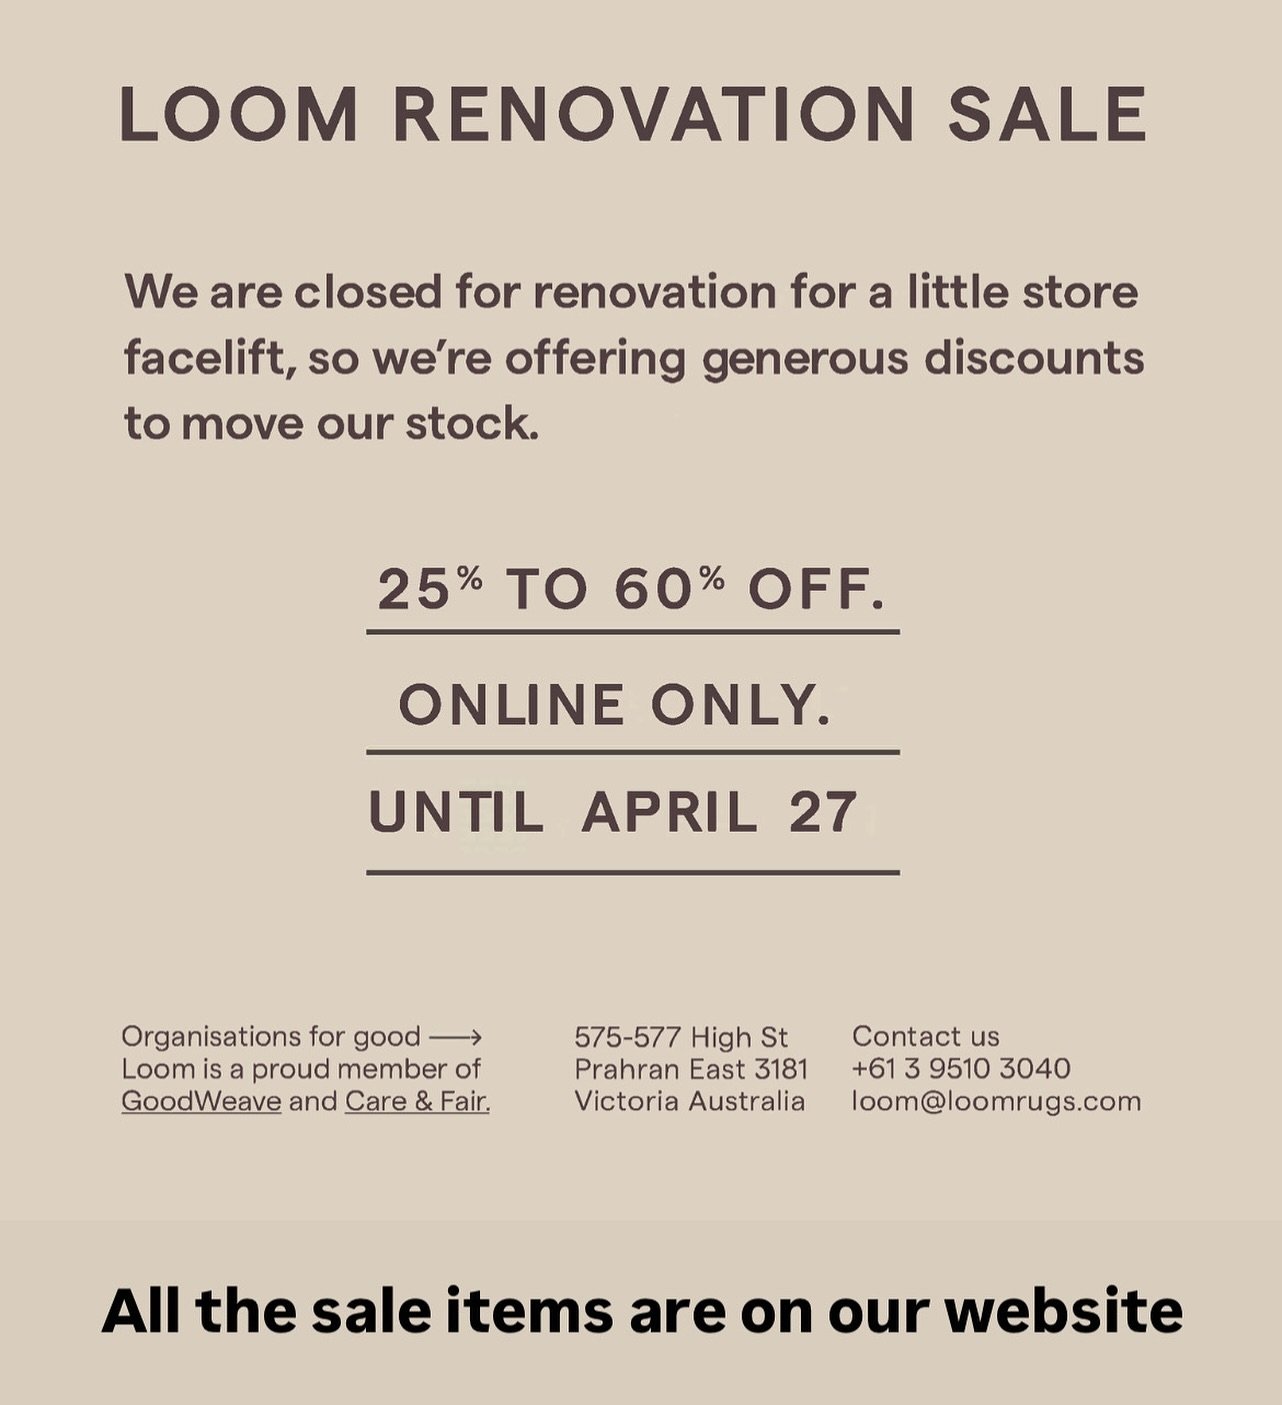 LOOM RENOVATION SALE 

25% to 60% off. 

We have extended the sale end date  to 27rd April due to renovation. 

Our store is closed now for a little store for renovation. We are offering generous discounts to move our stock. 

ONLINE  ONLY. ( via ema